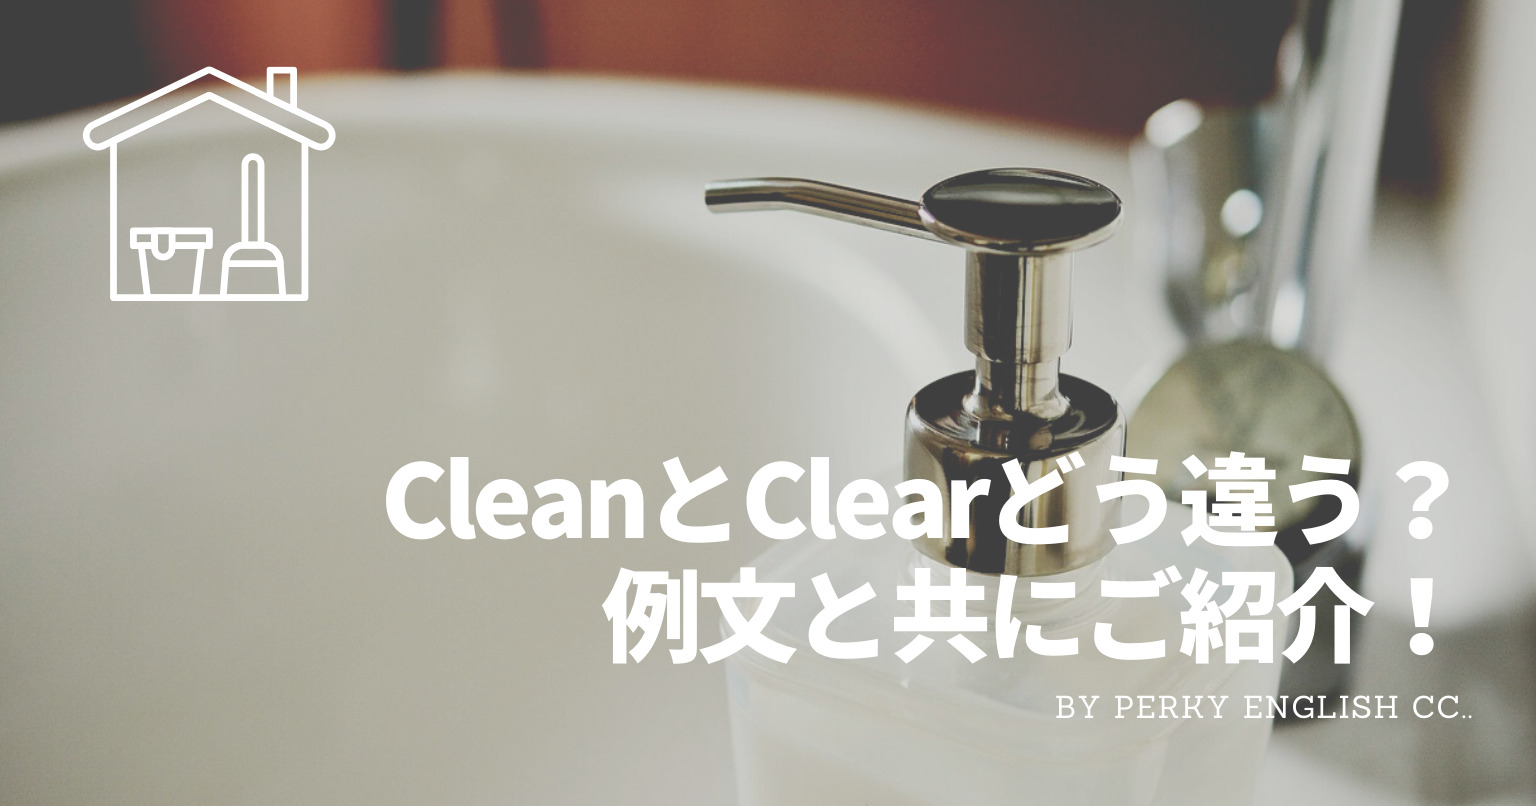 Clean と Clear はどう違う 使える英語例文もご紹介 蒲田 浜松町 英会話パーキー